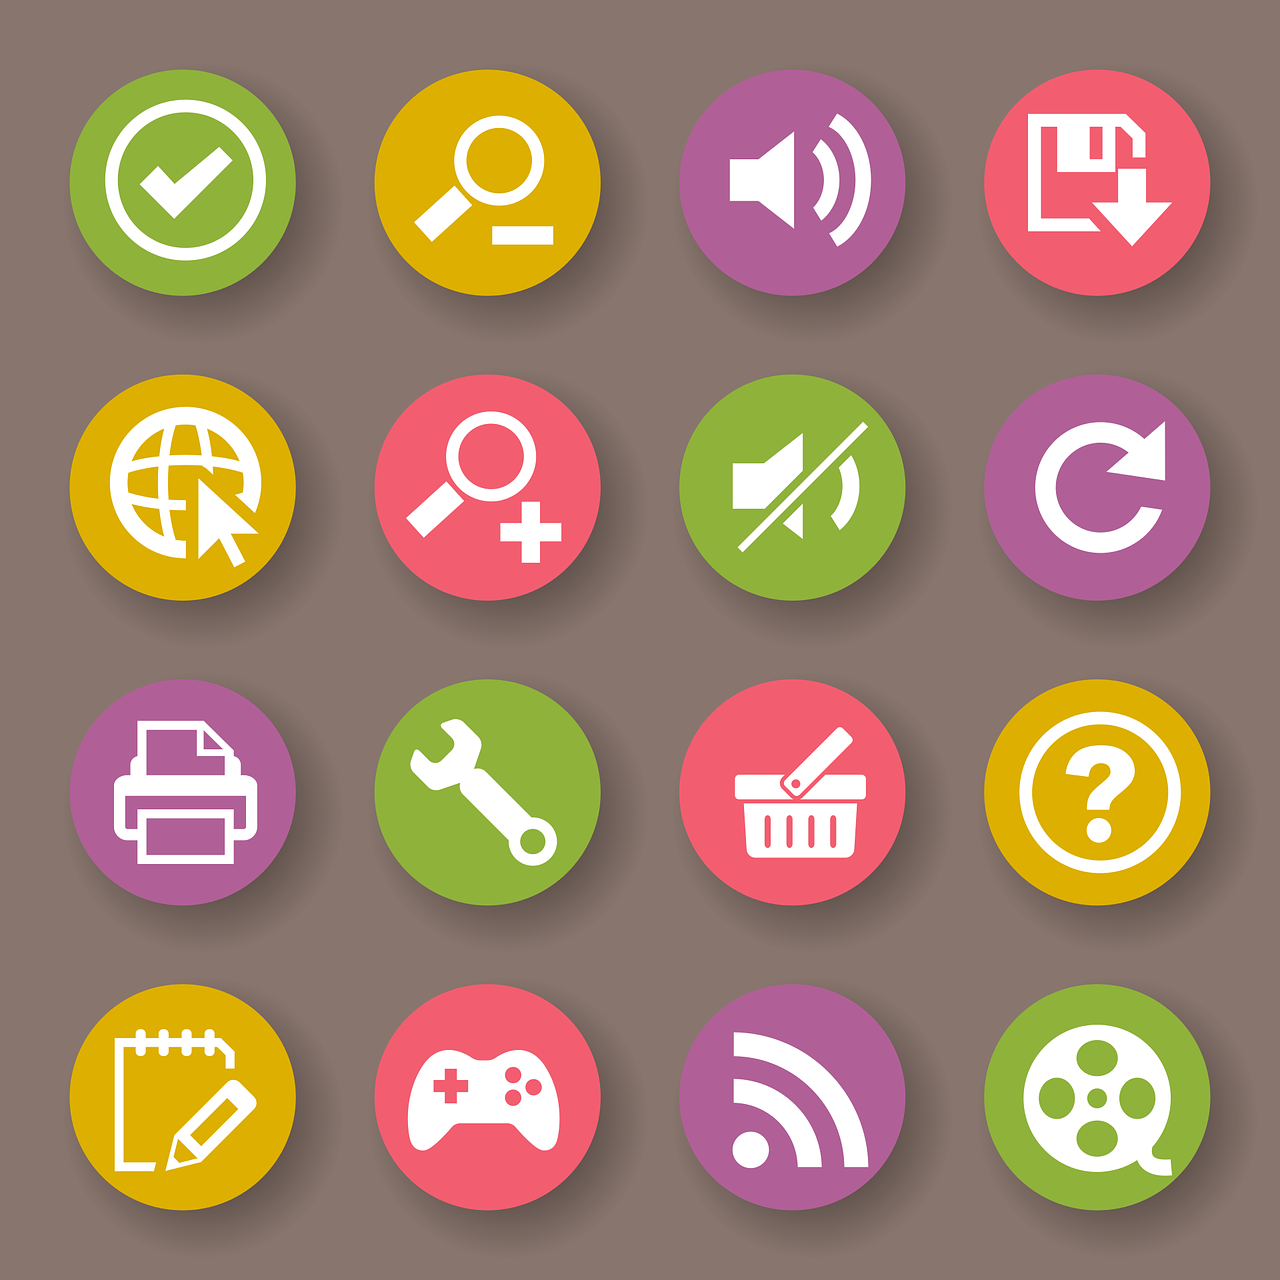 Various Tool Icons Shown